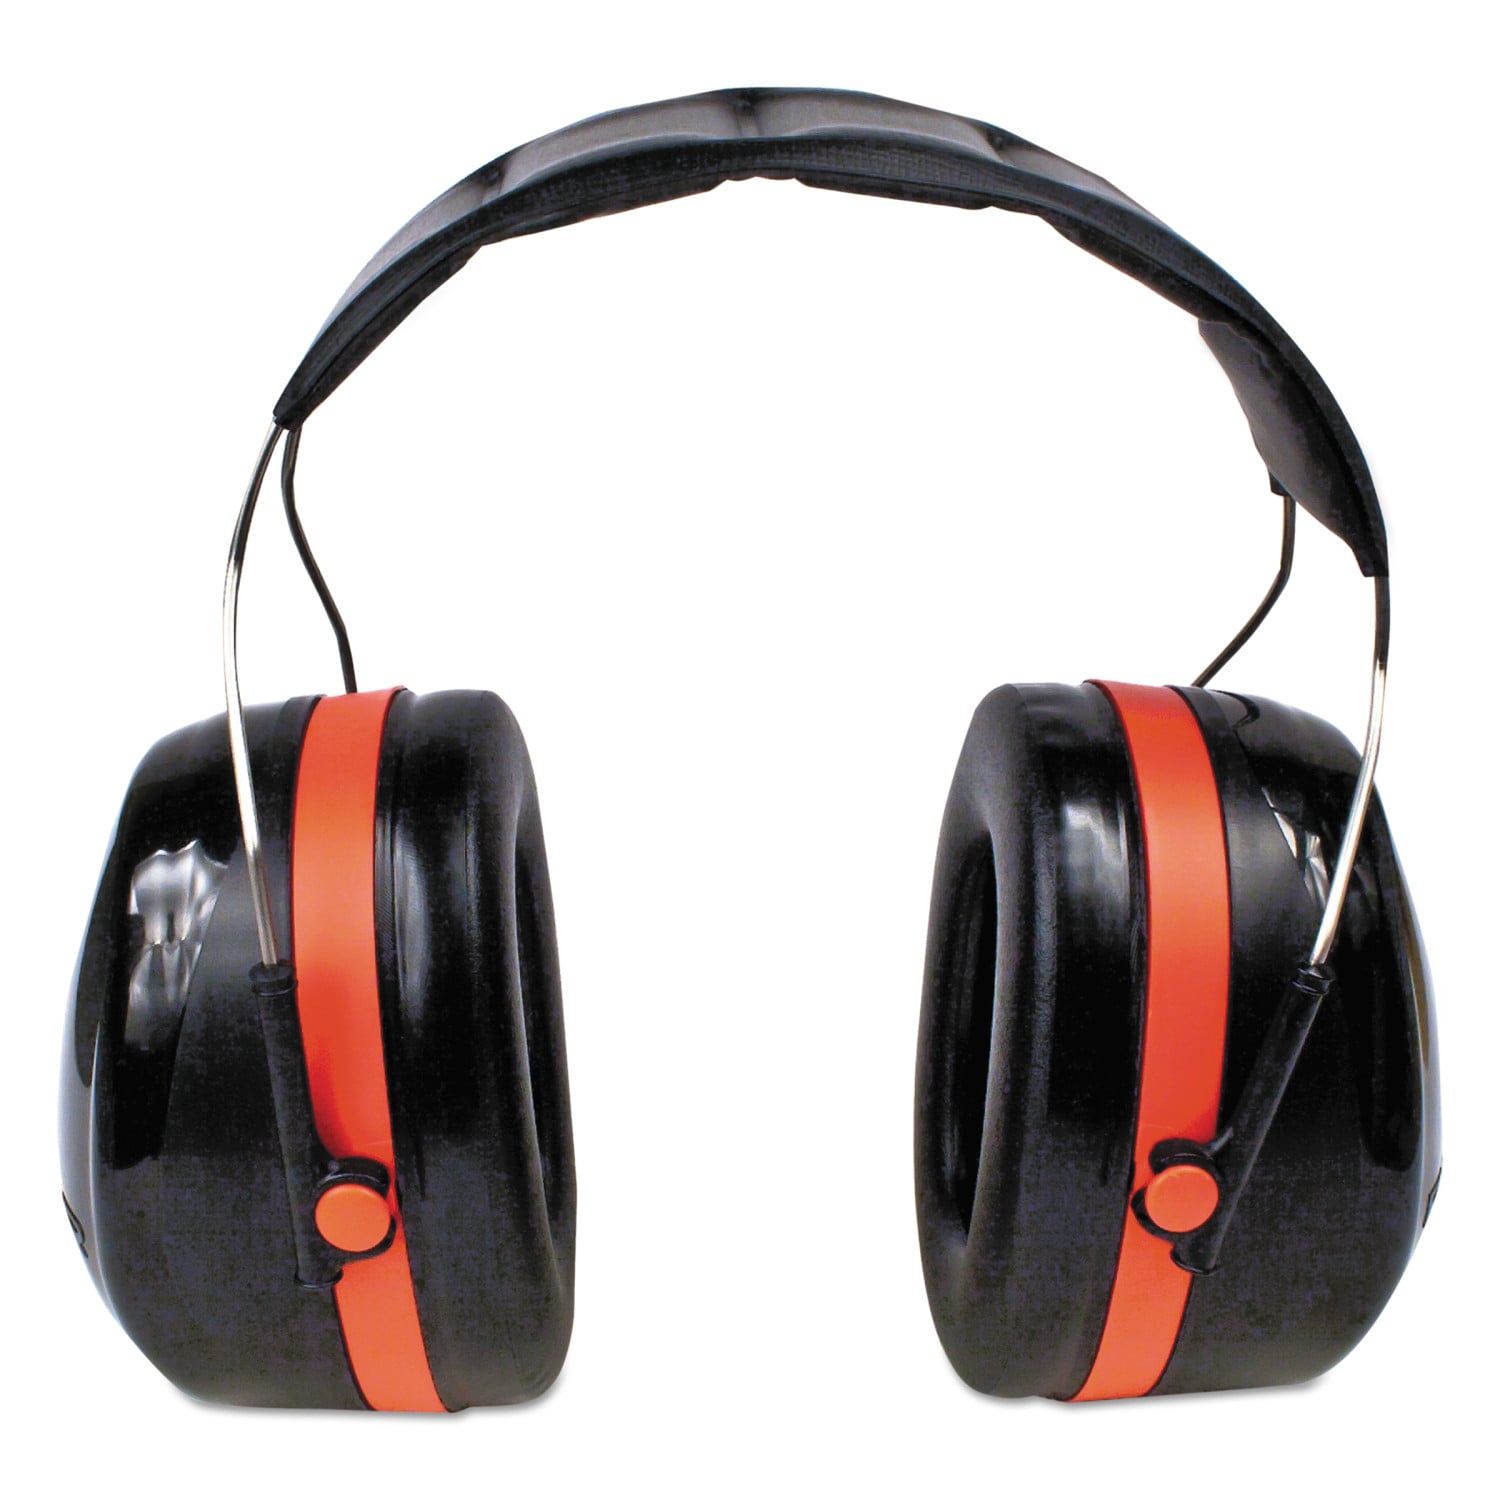 3M Peltor Optime Hearing Protection Earmuffs in the Hearing